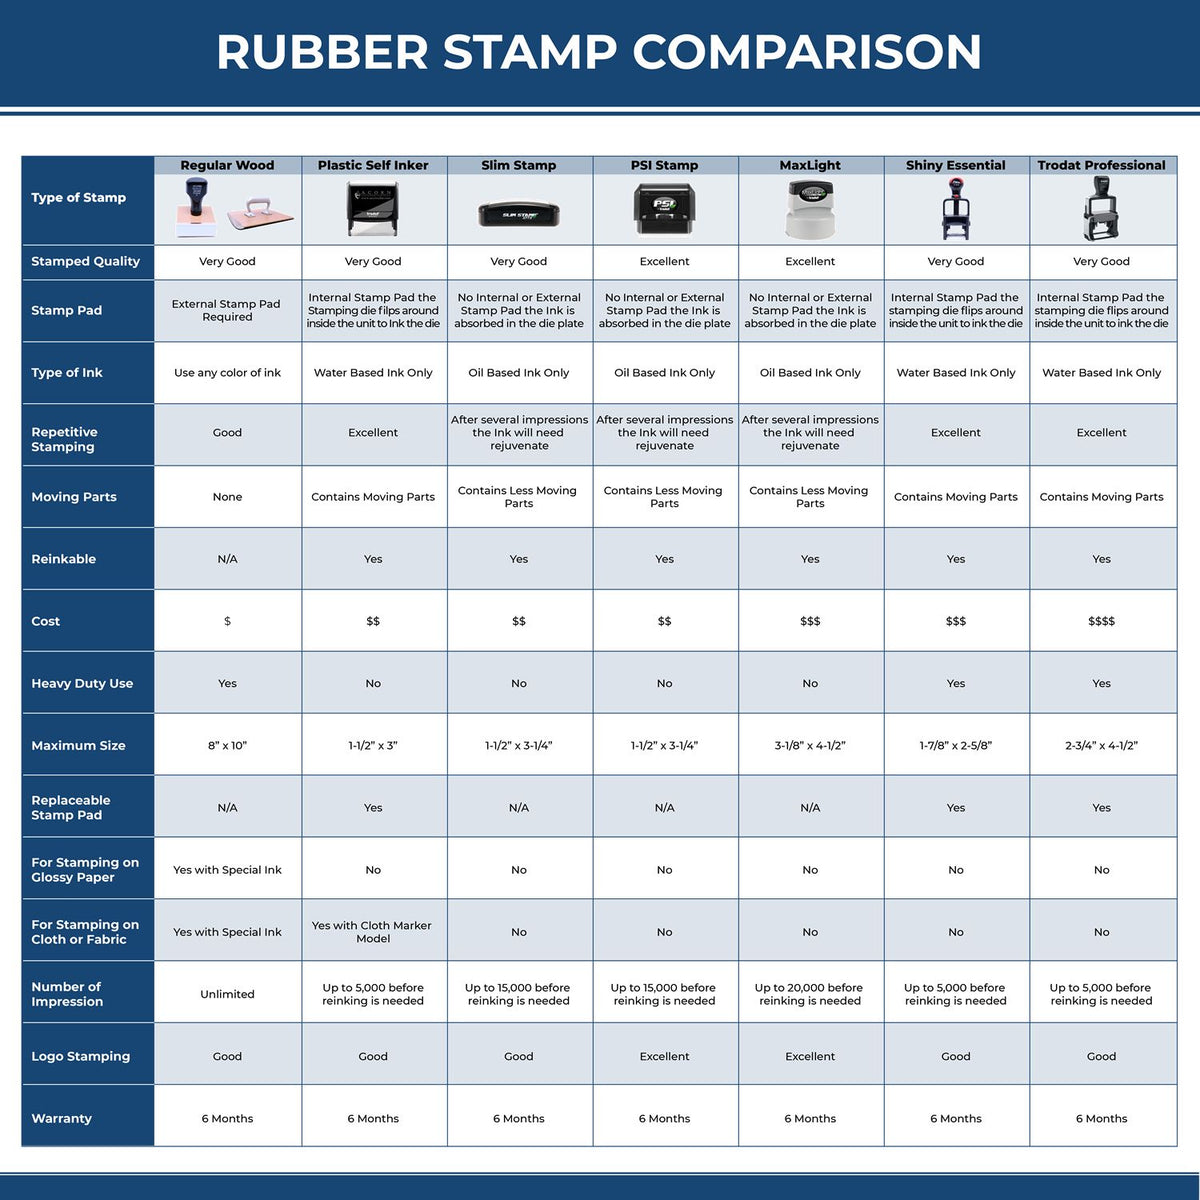 Large Secondary Insurance Rubber Stamp 4519R Rubber Stamp Comparison